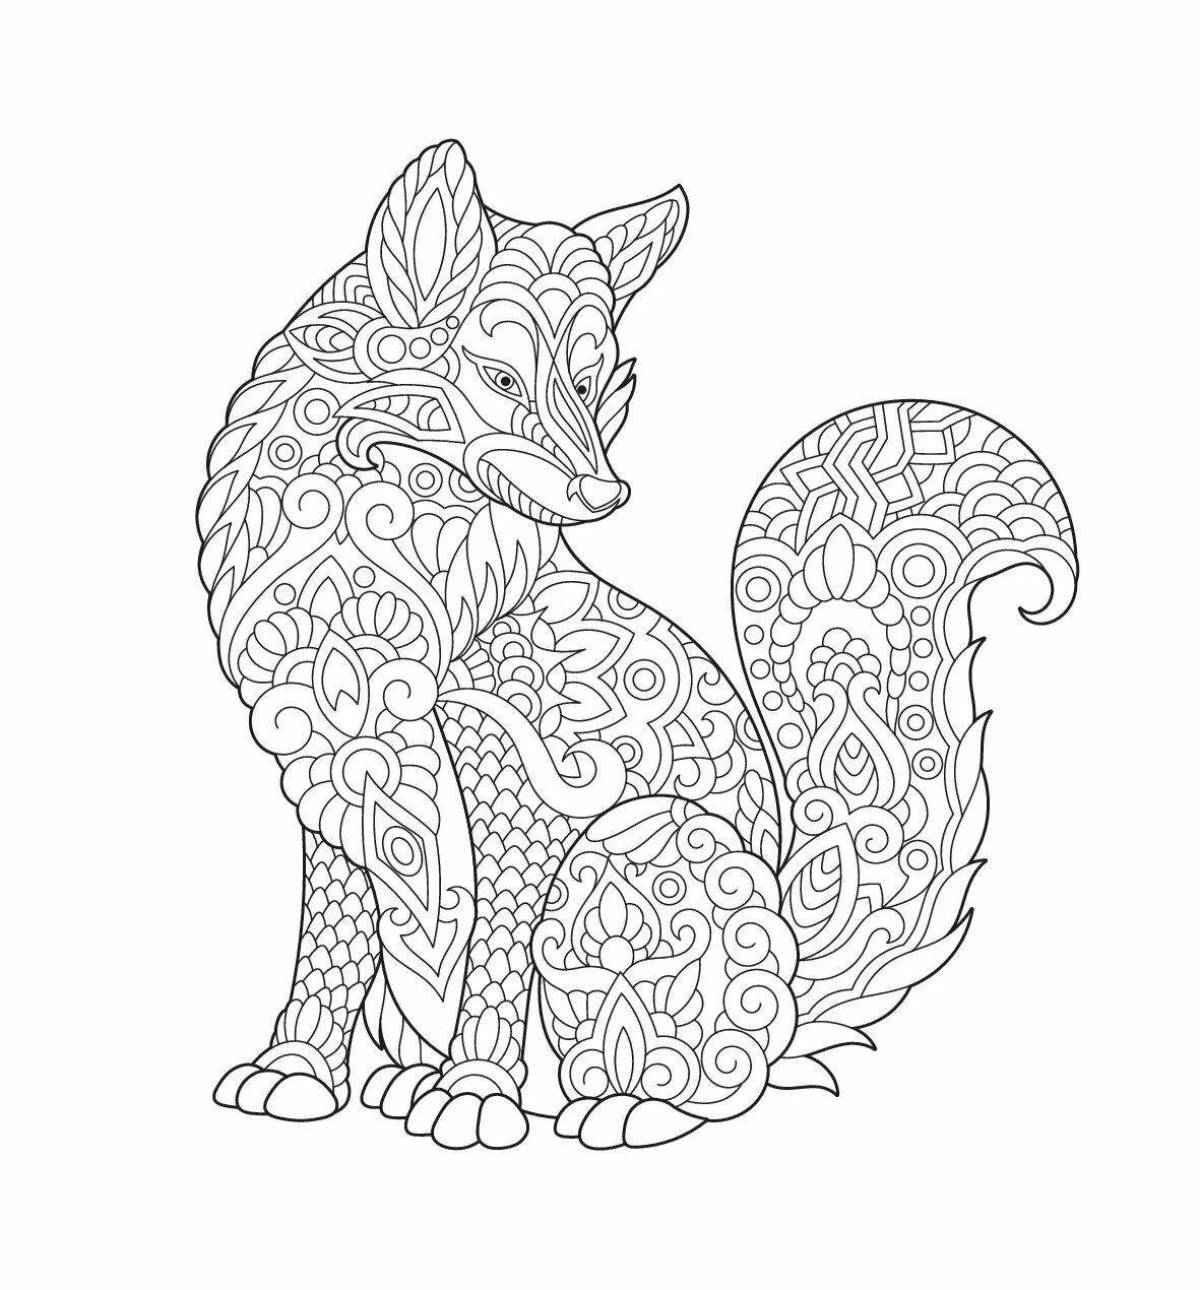 Adorable fox coloring book for adults